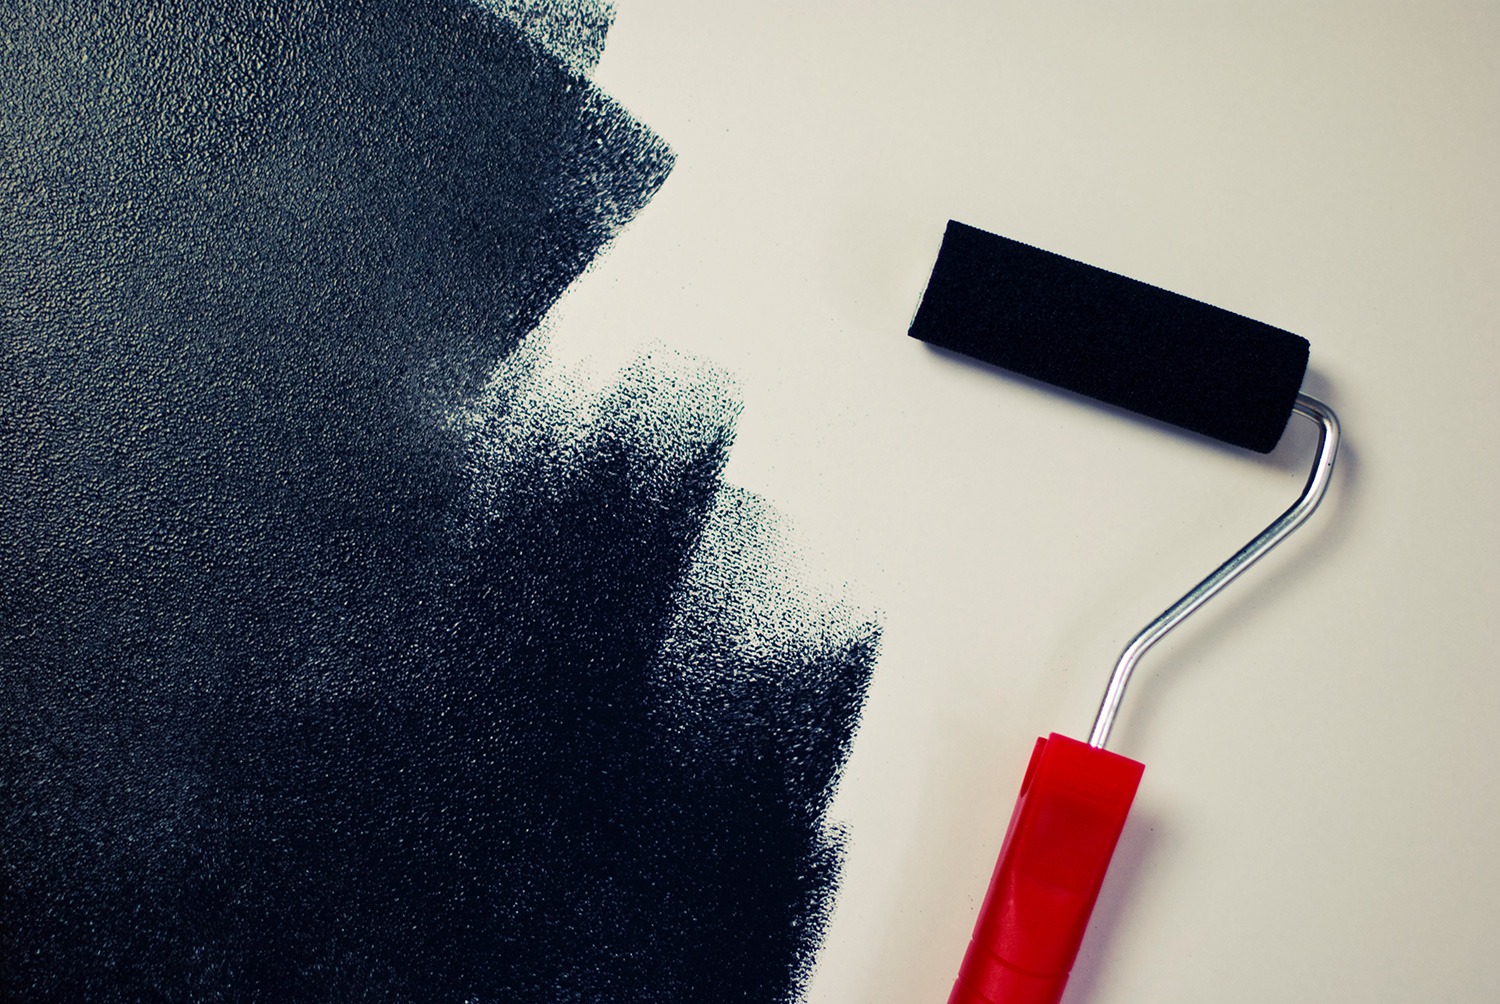 Paint roller rolling black paint onto a white wall